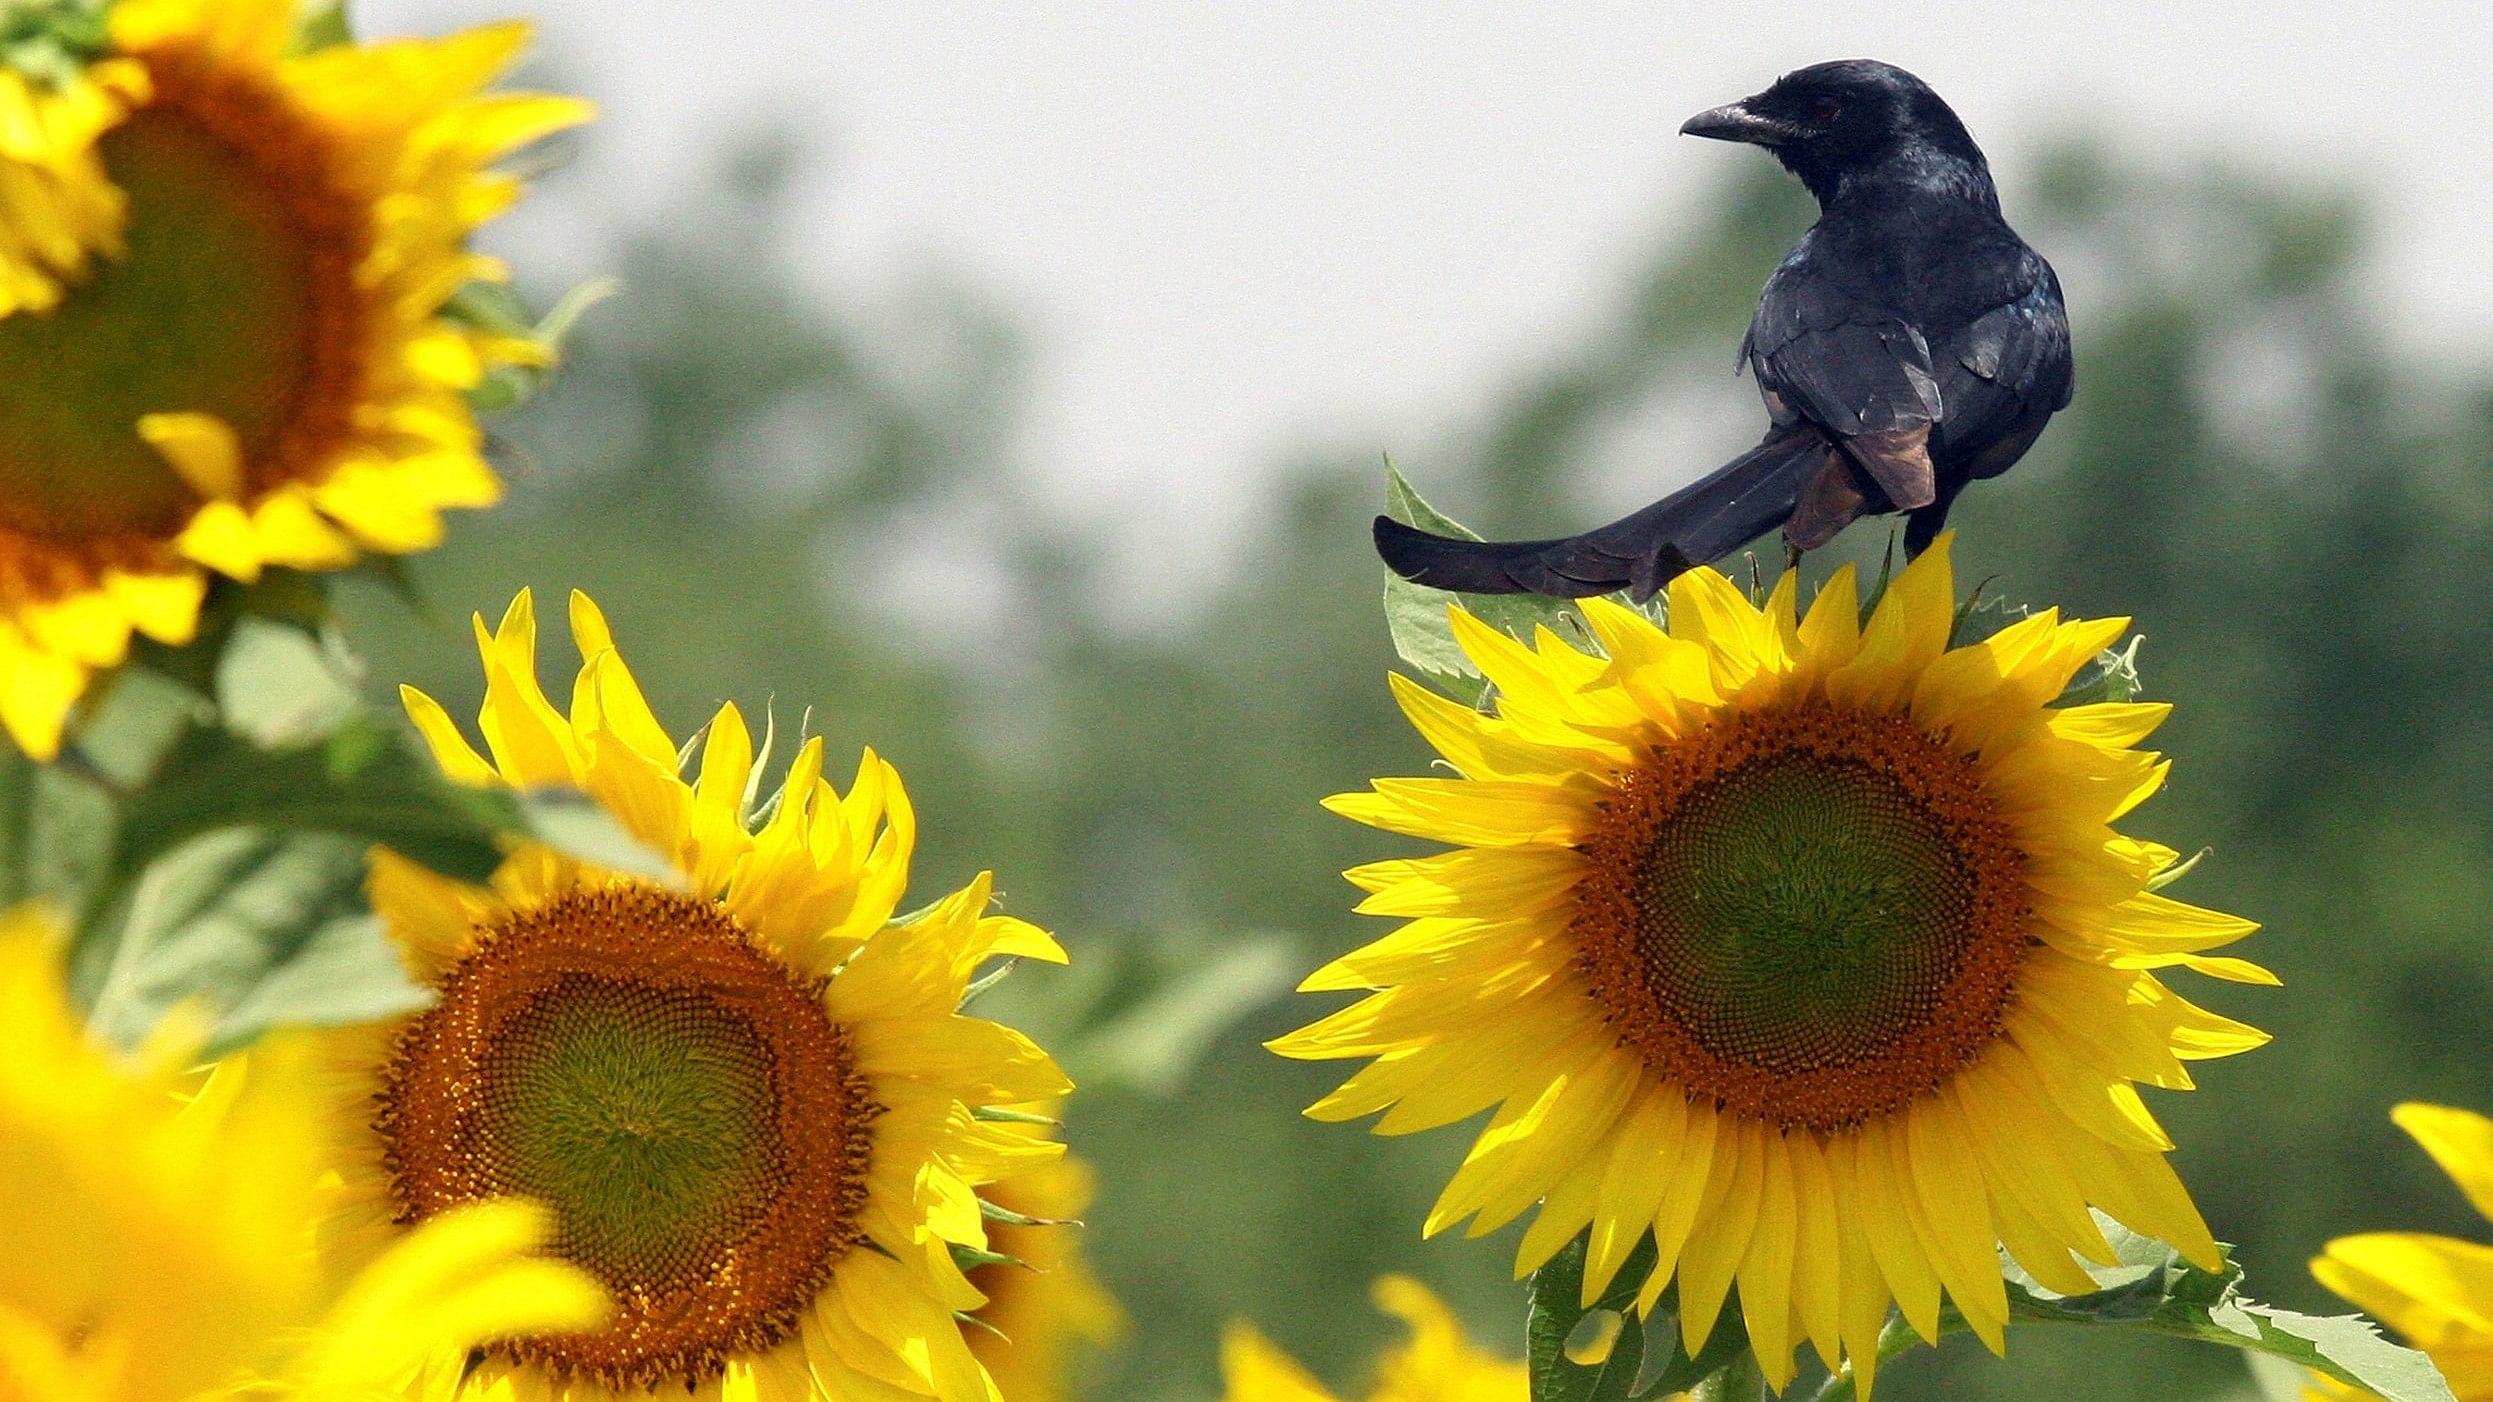 <div class="paragraphs"><p>File Photo : A bird sits on a sunflower at a field.</p></div>